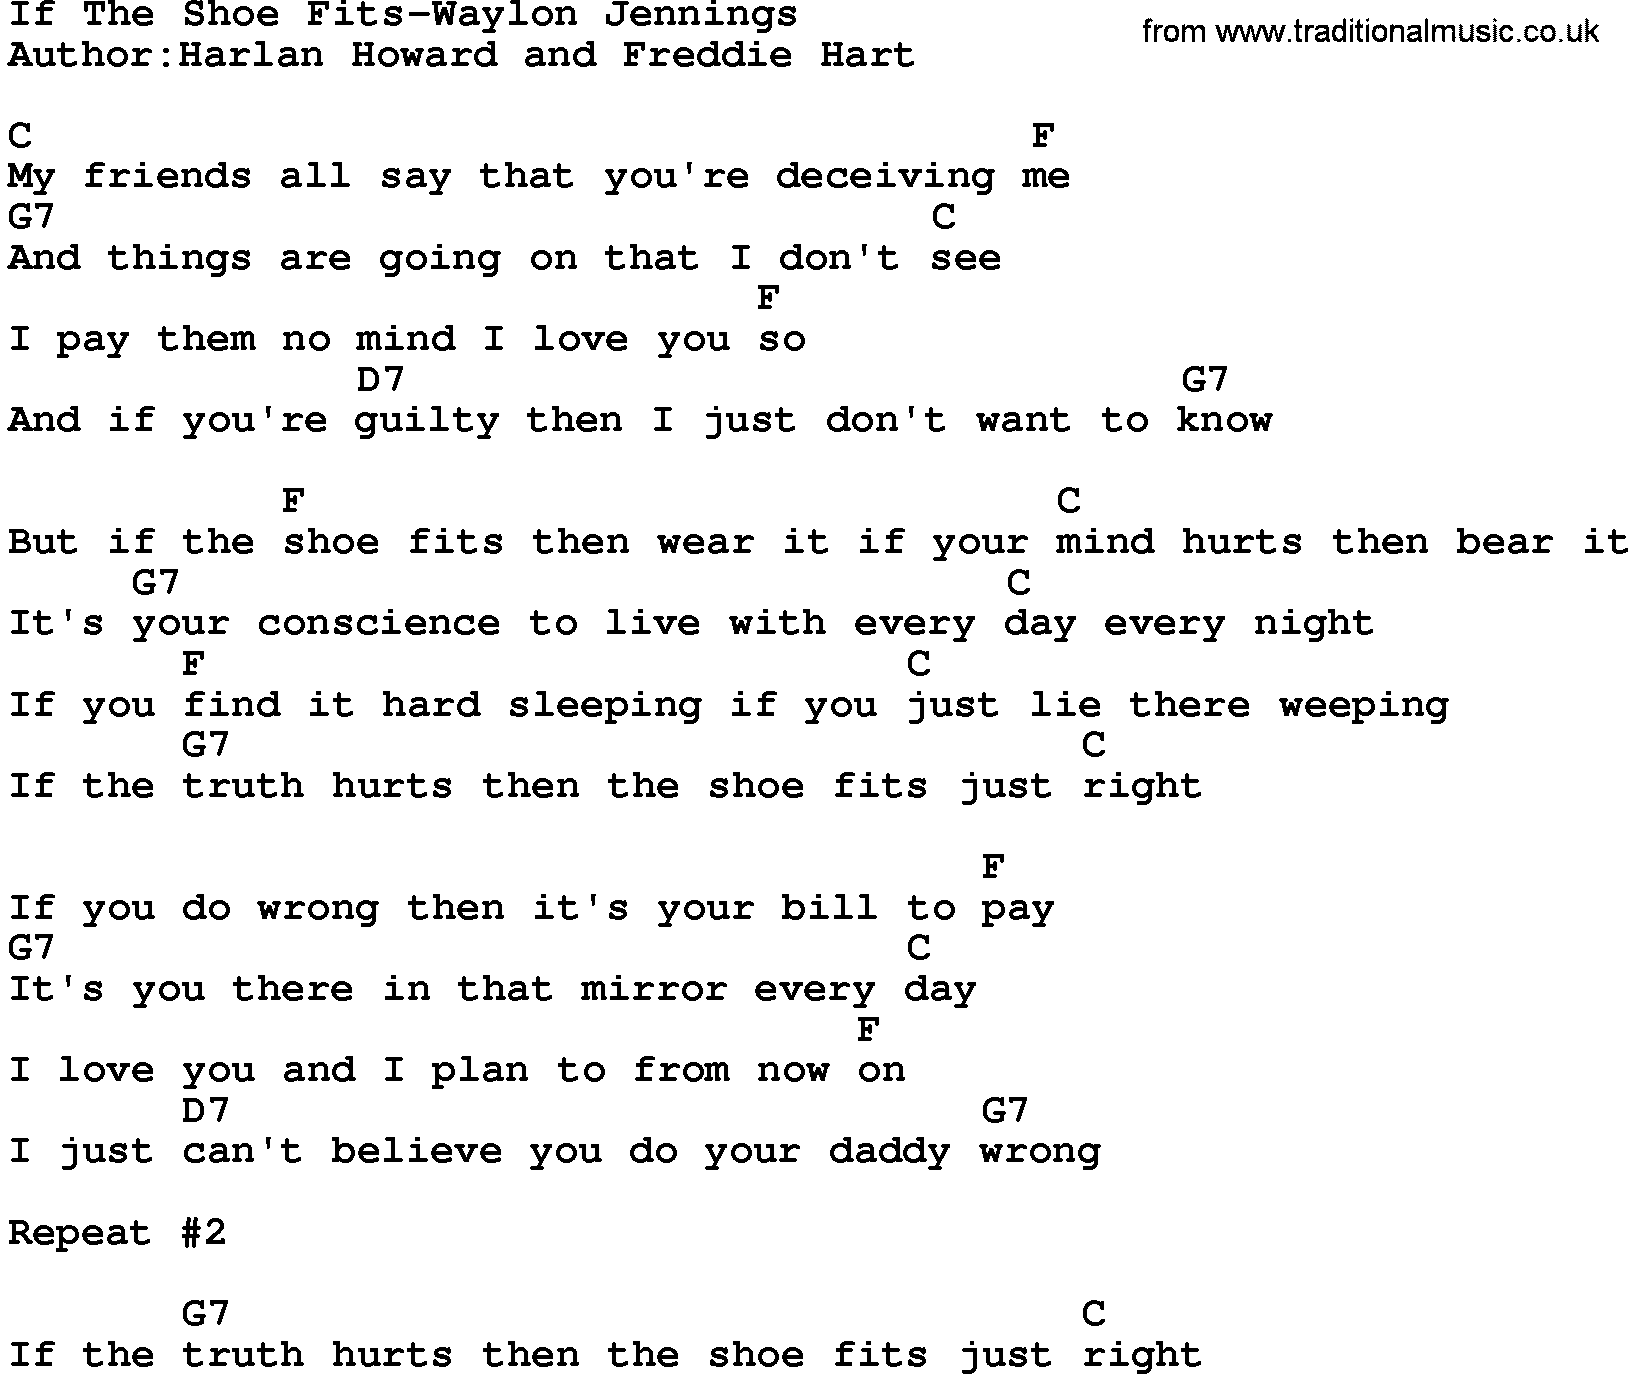 Country music song: If The Shoe Fits-Waylon Jennings lyrics and chords